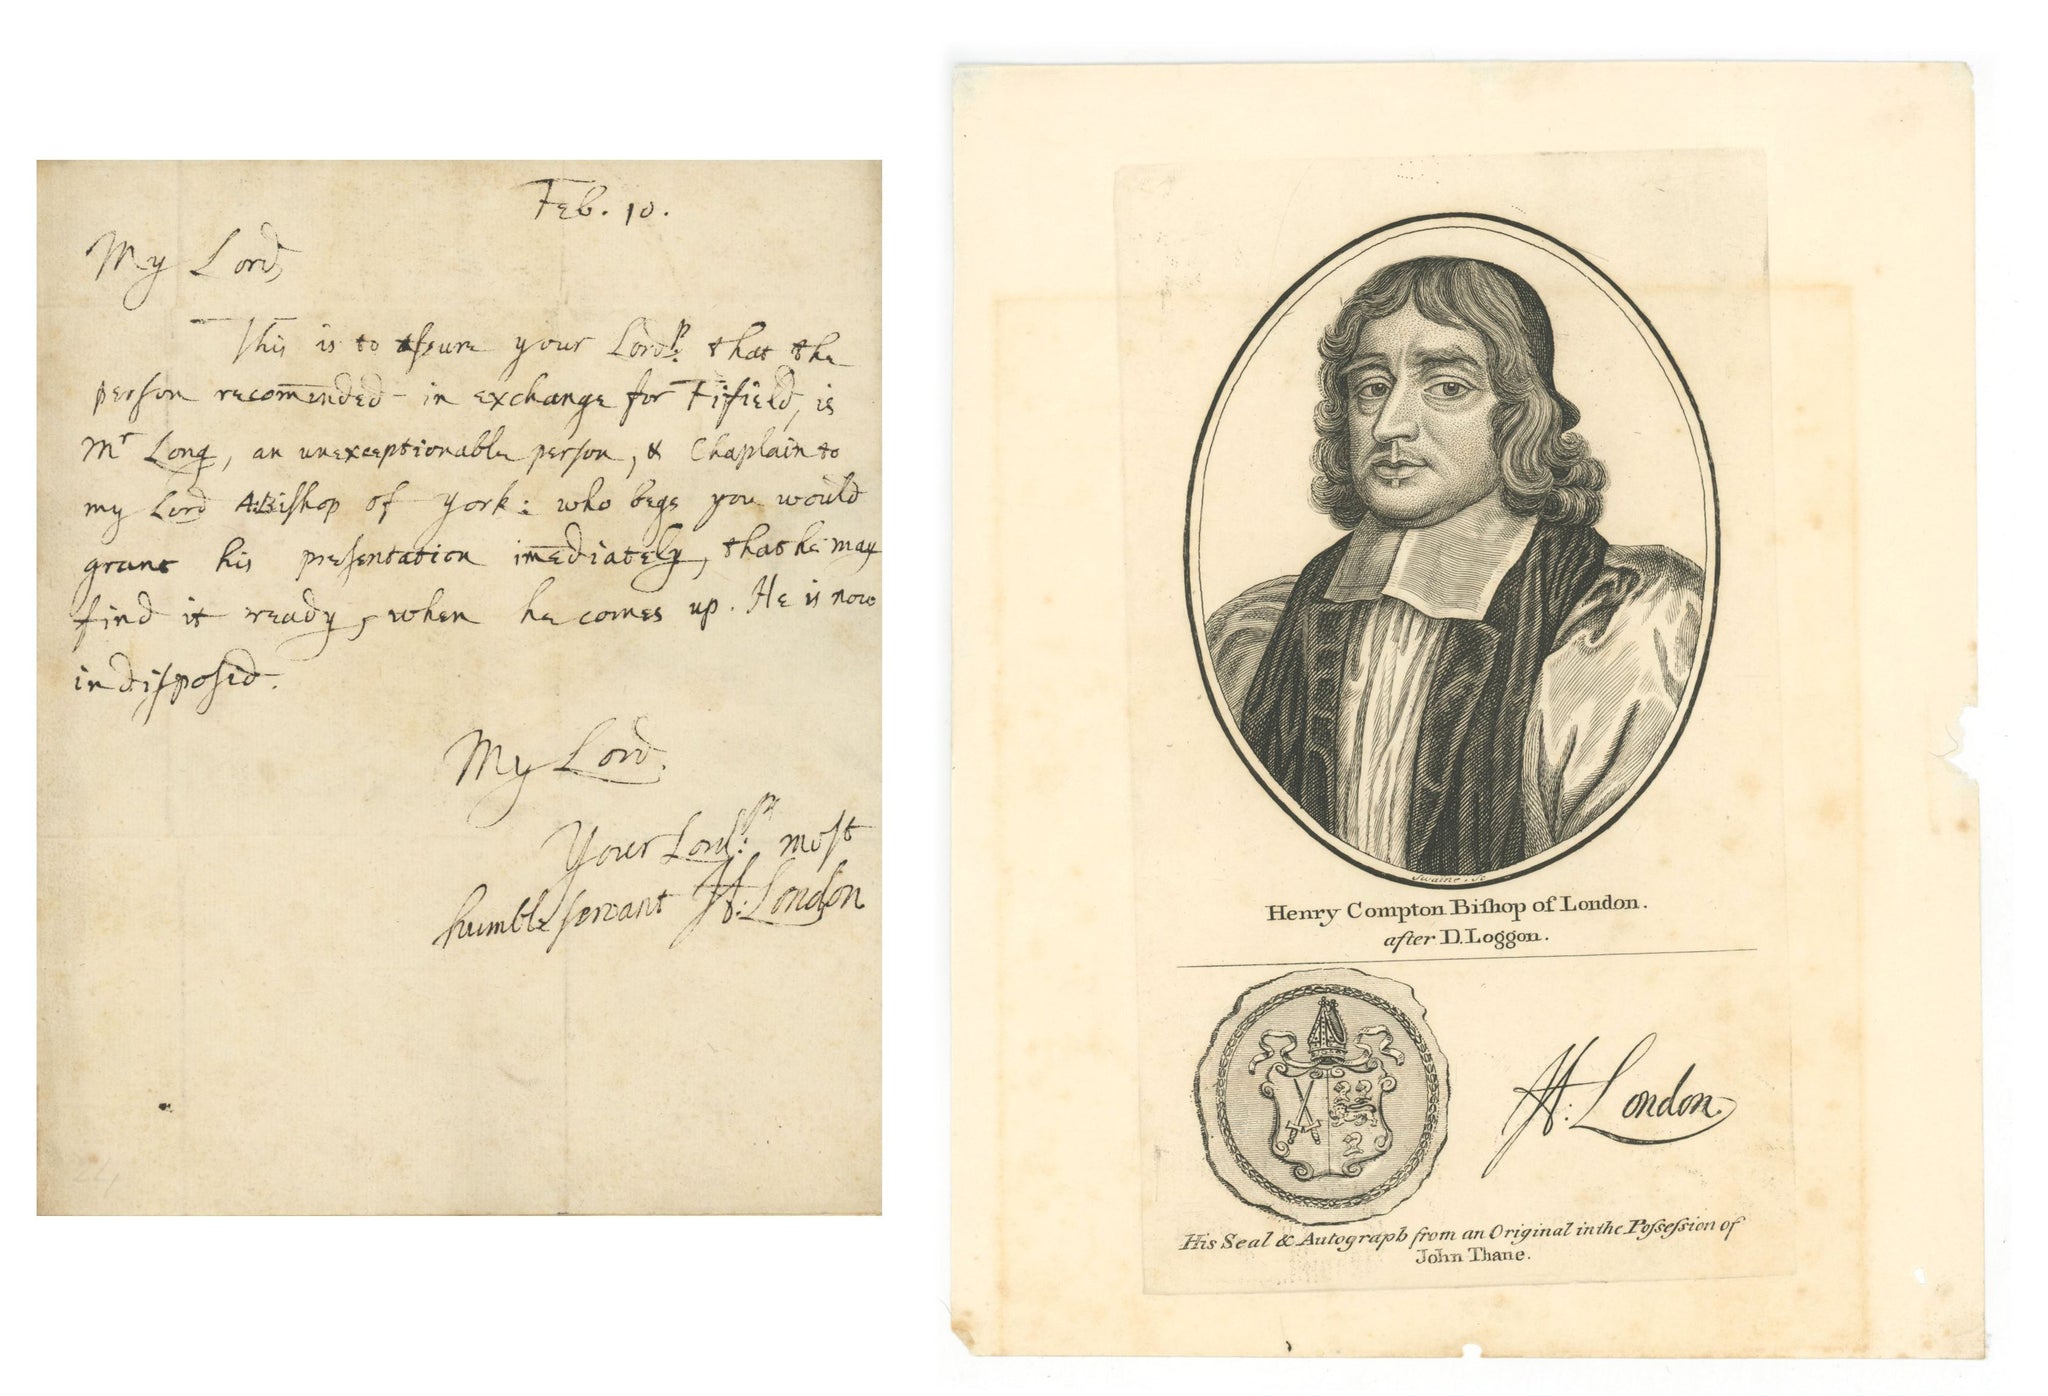 Lot 14:  HENRY COMPTON - ONE OF THE IMMORTAL SEVEN IN THE GLORIOUS REVOLUTION - AUTOGRAPHED LETTER